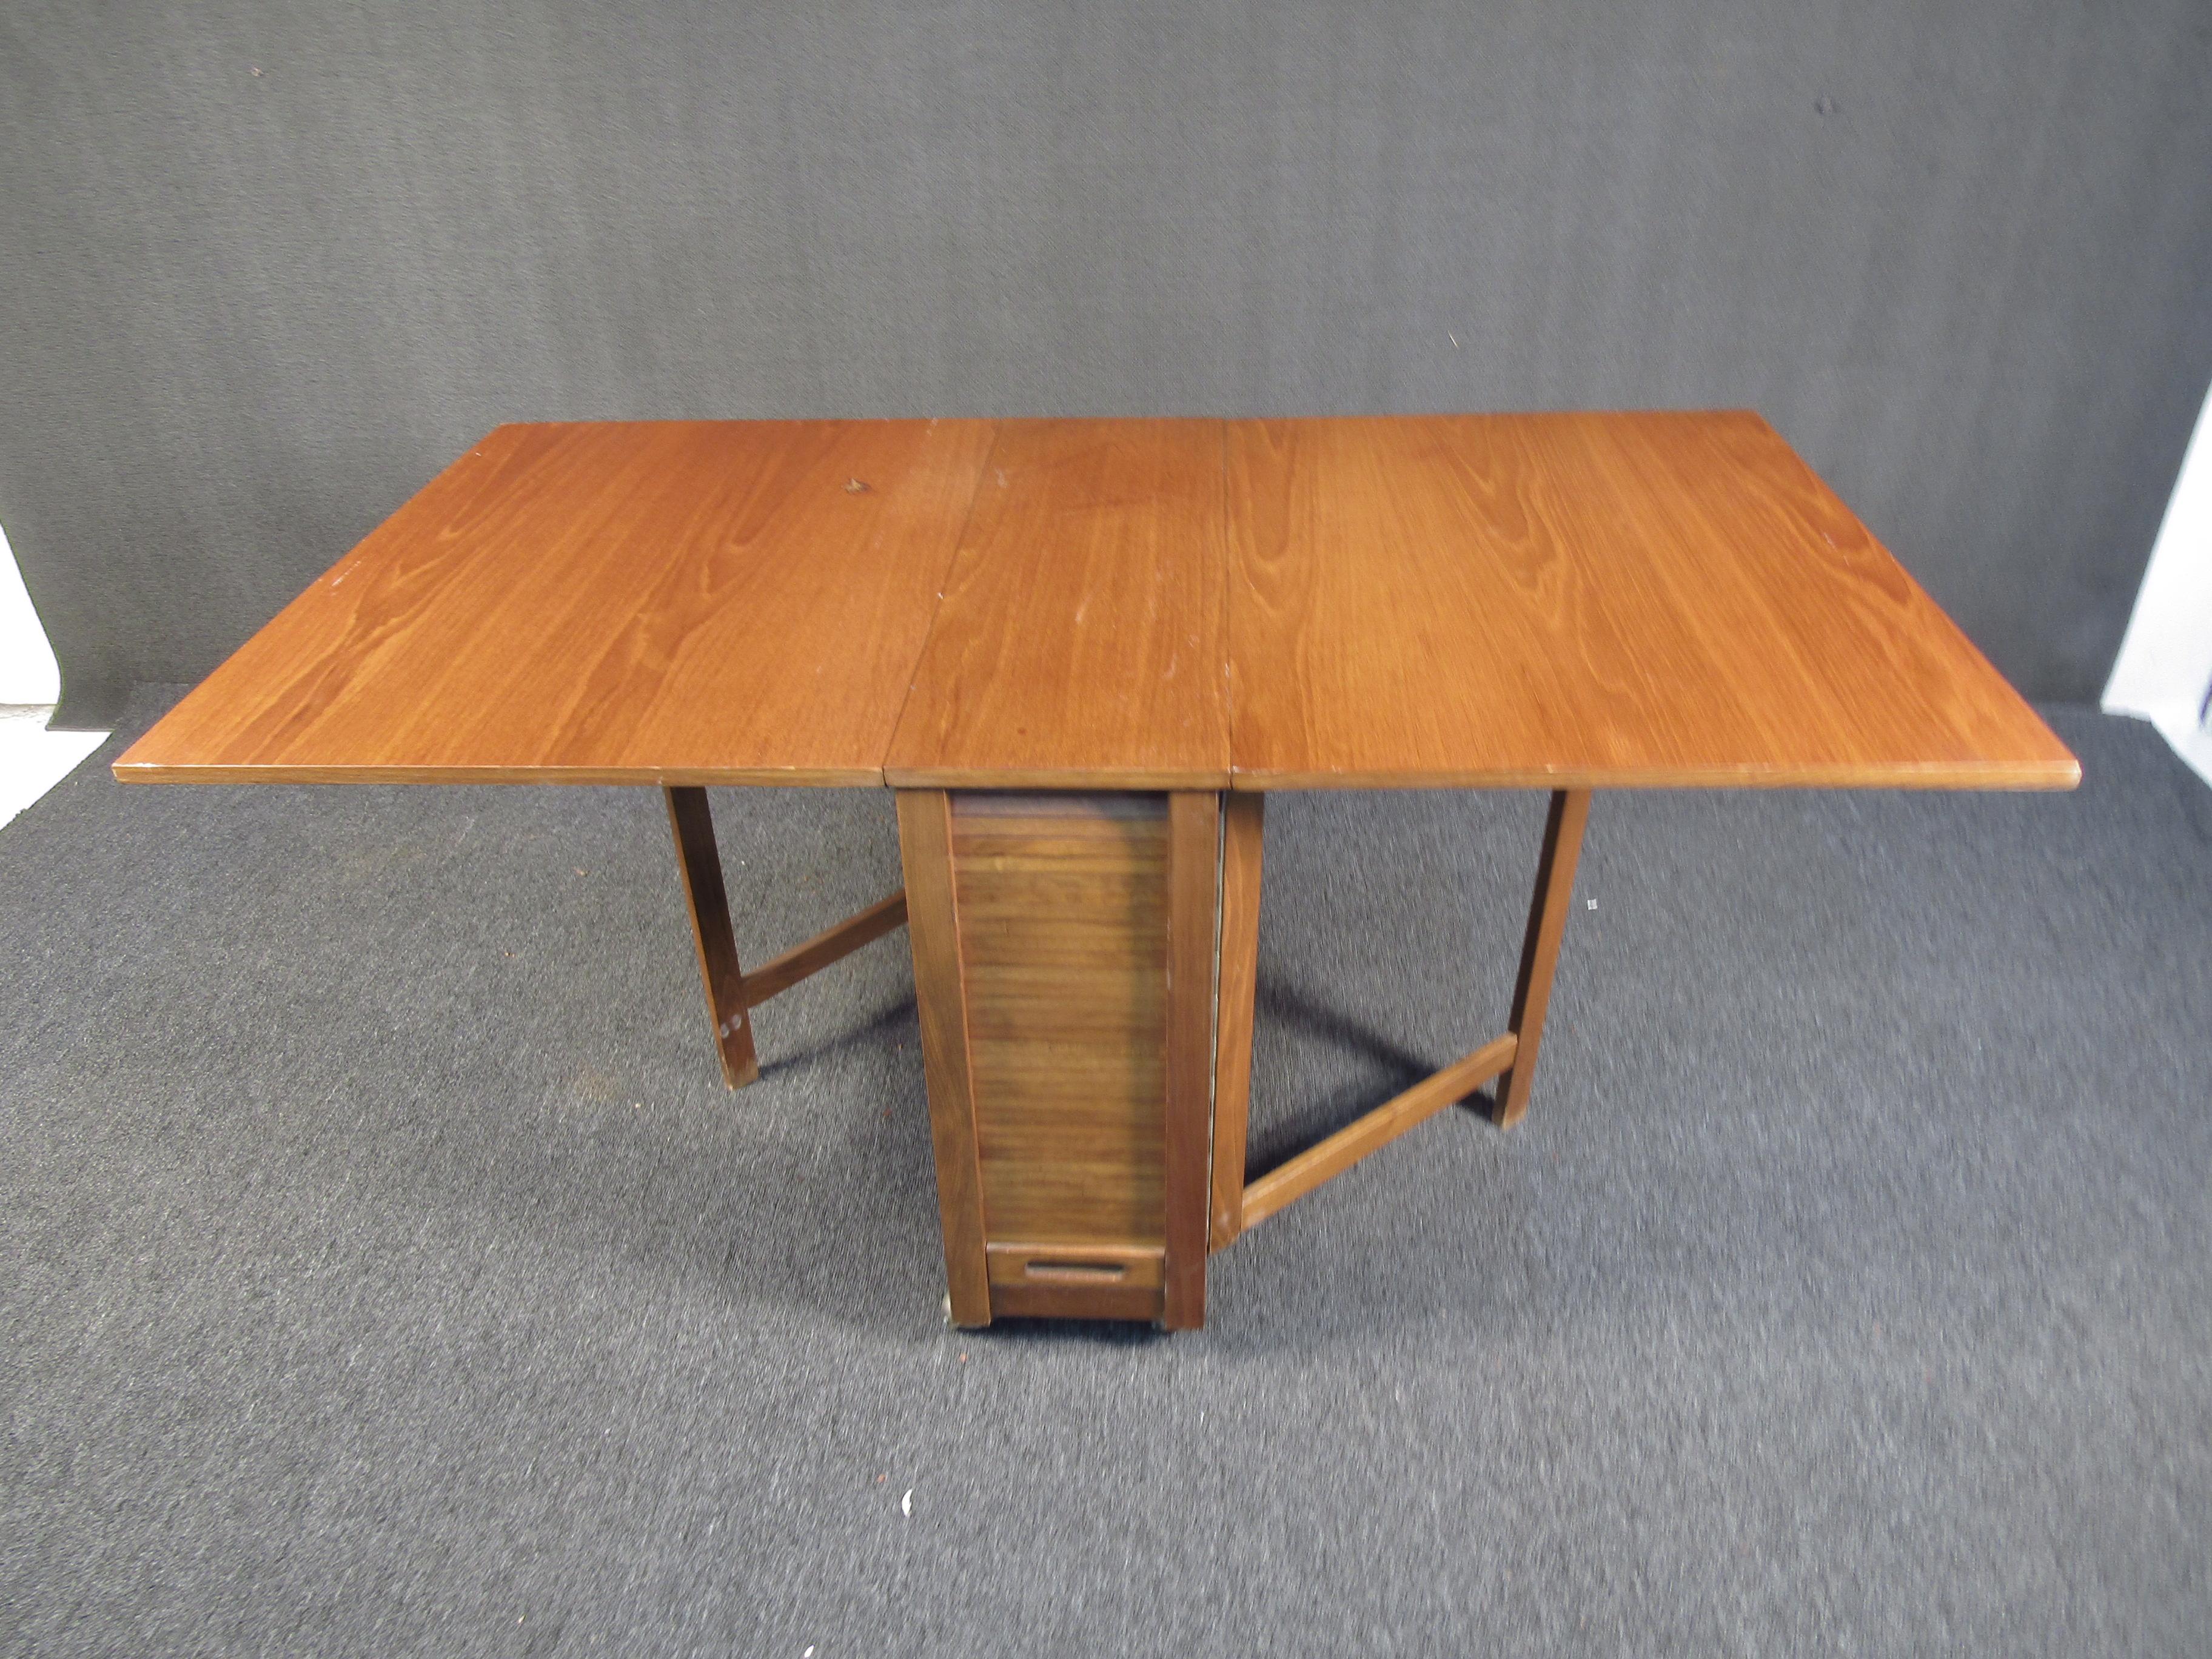 Stunning Teak Midcentury Drop-Leaf Table with Chairs 1